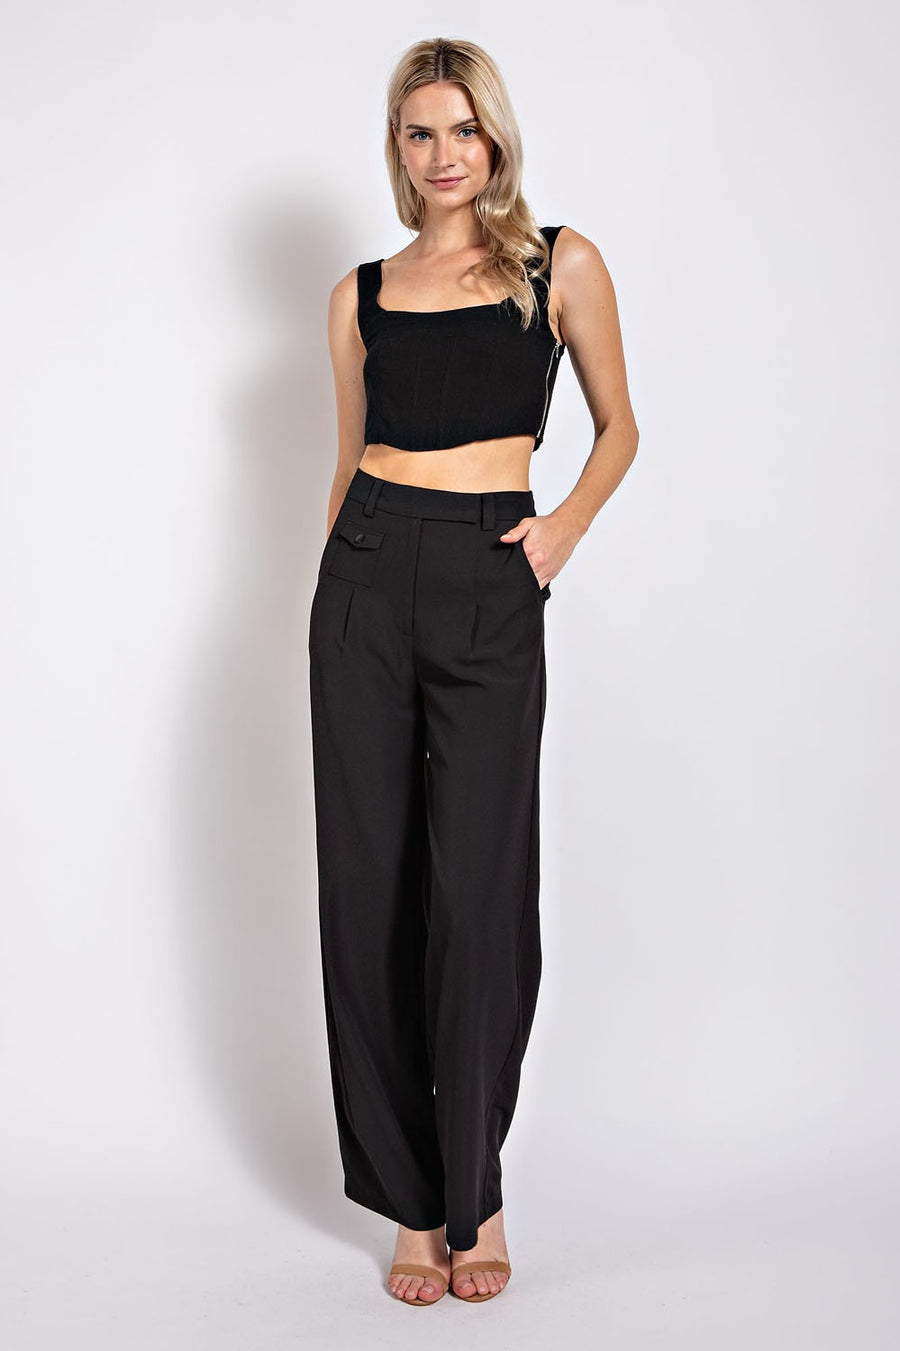 Linen crop top featuring pleated details and zipper. 